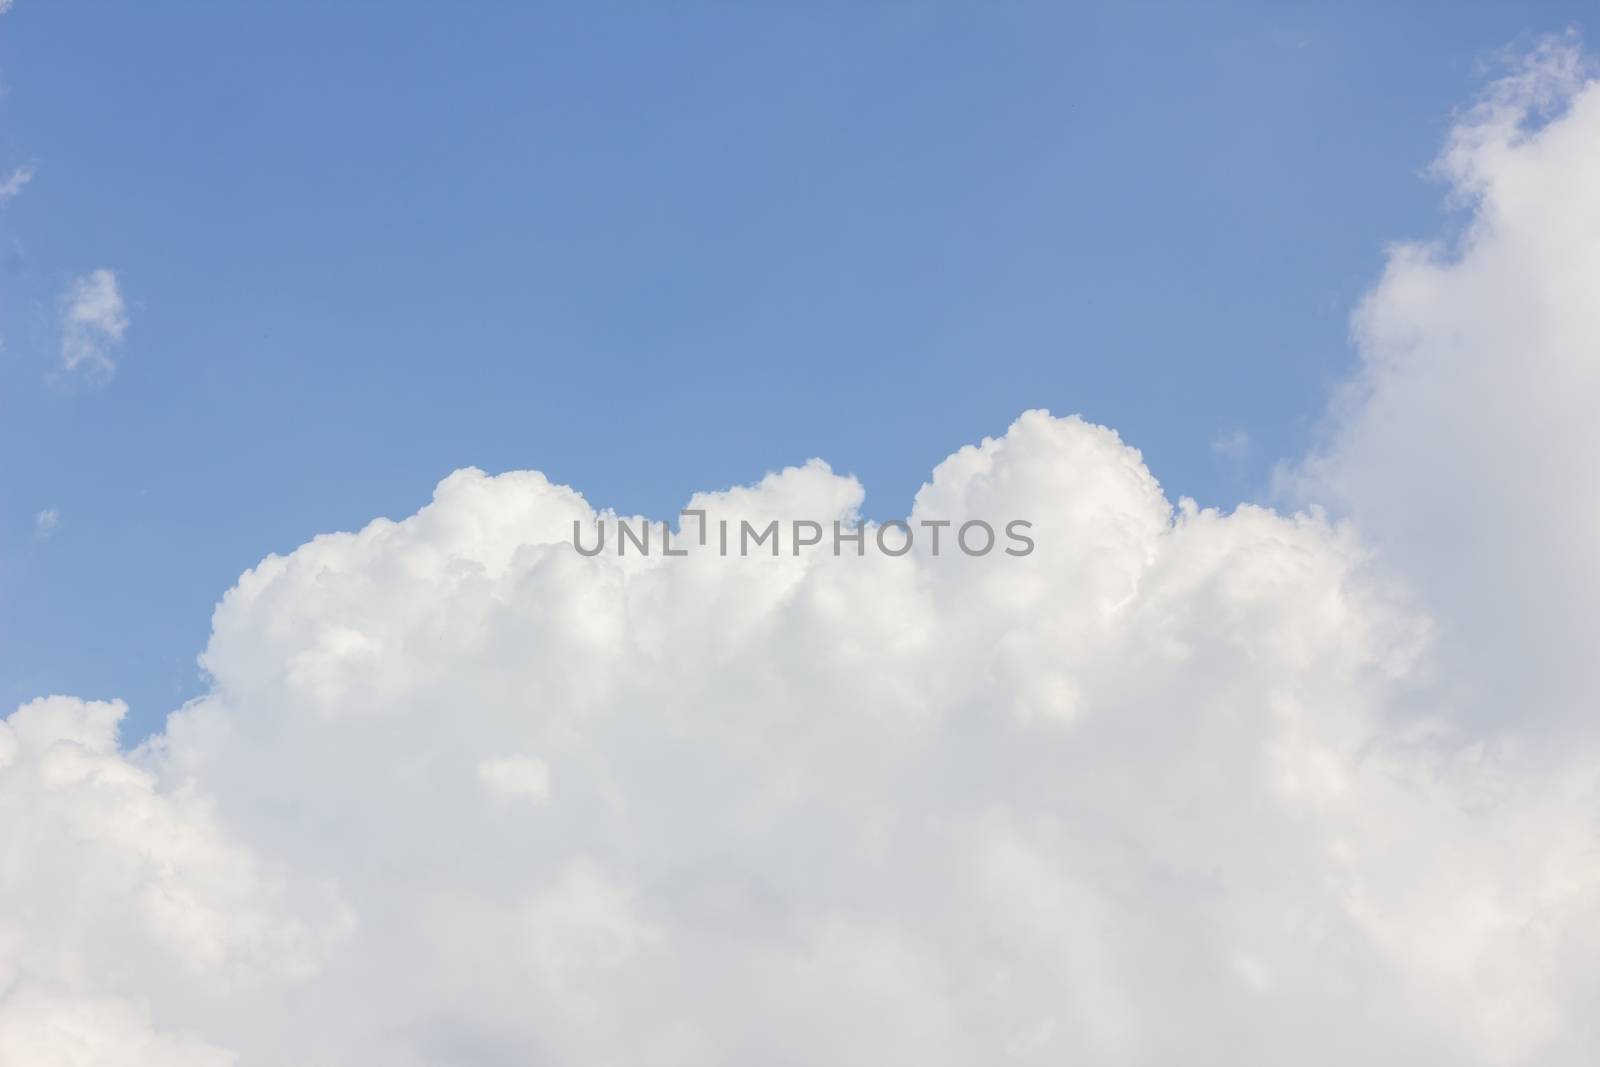 Clouds with blue sky used for background.